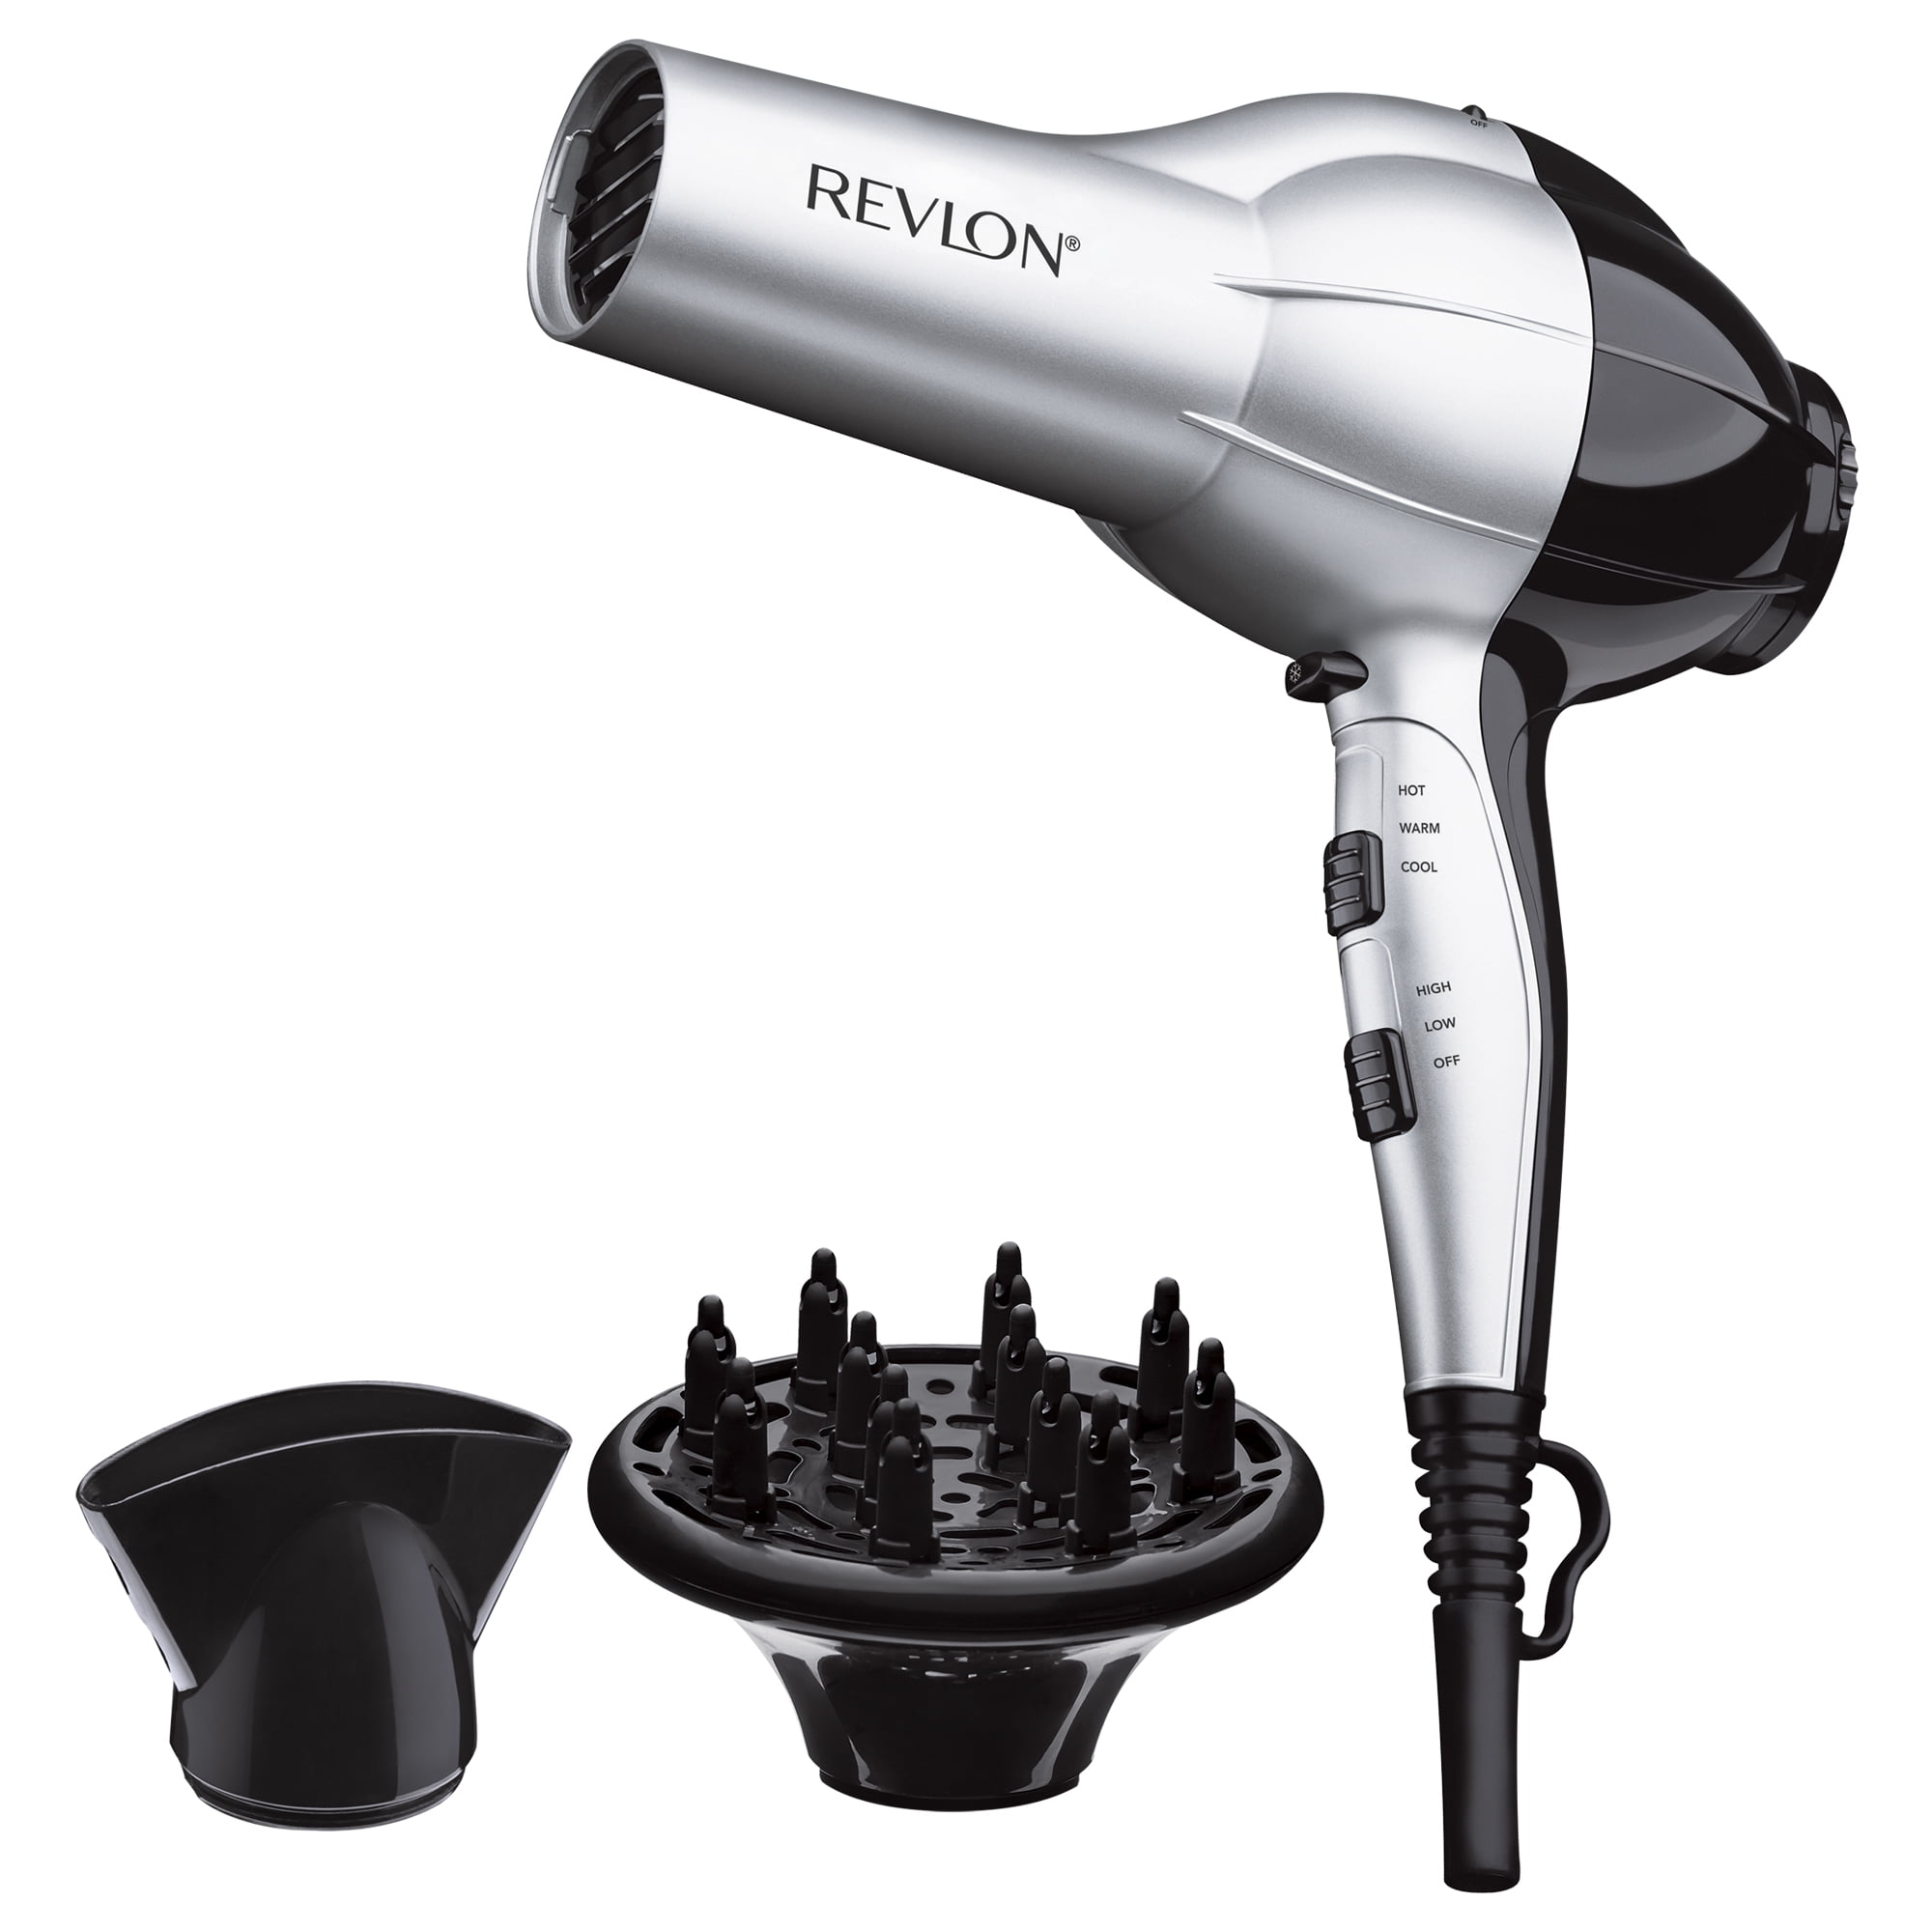 Revlon Perfect Heat Ceramic Turbo Ionic Hair Dryers, Silver with Concentrator and Diffuser